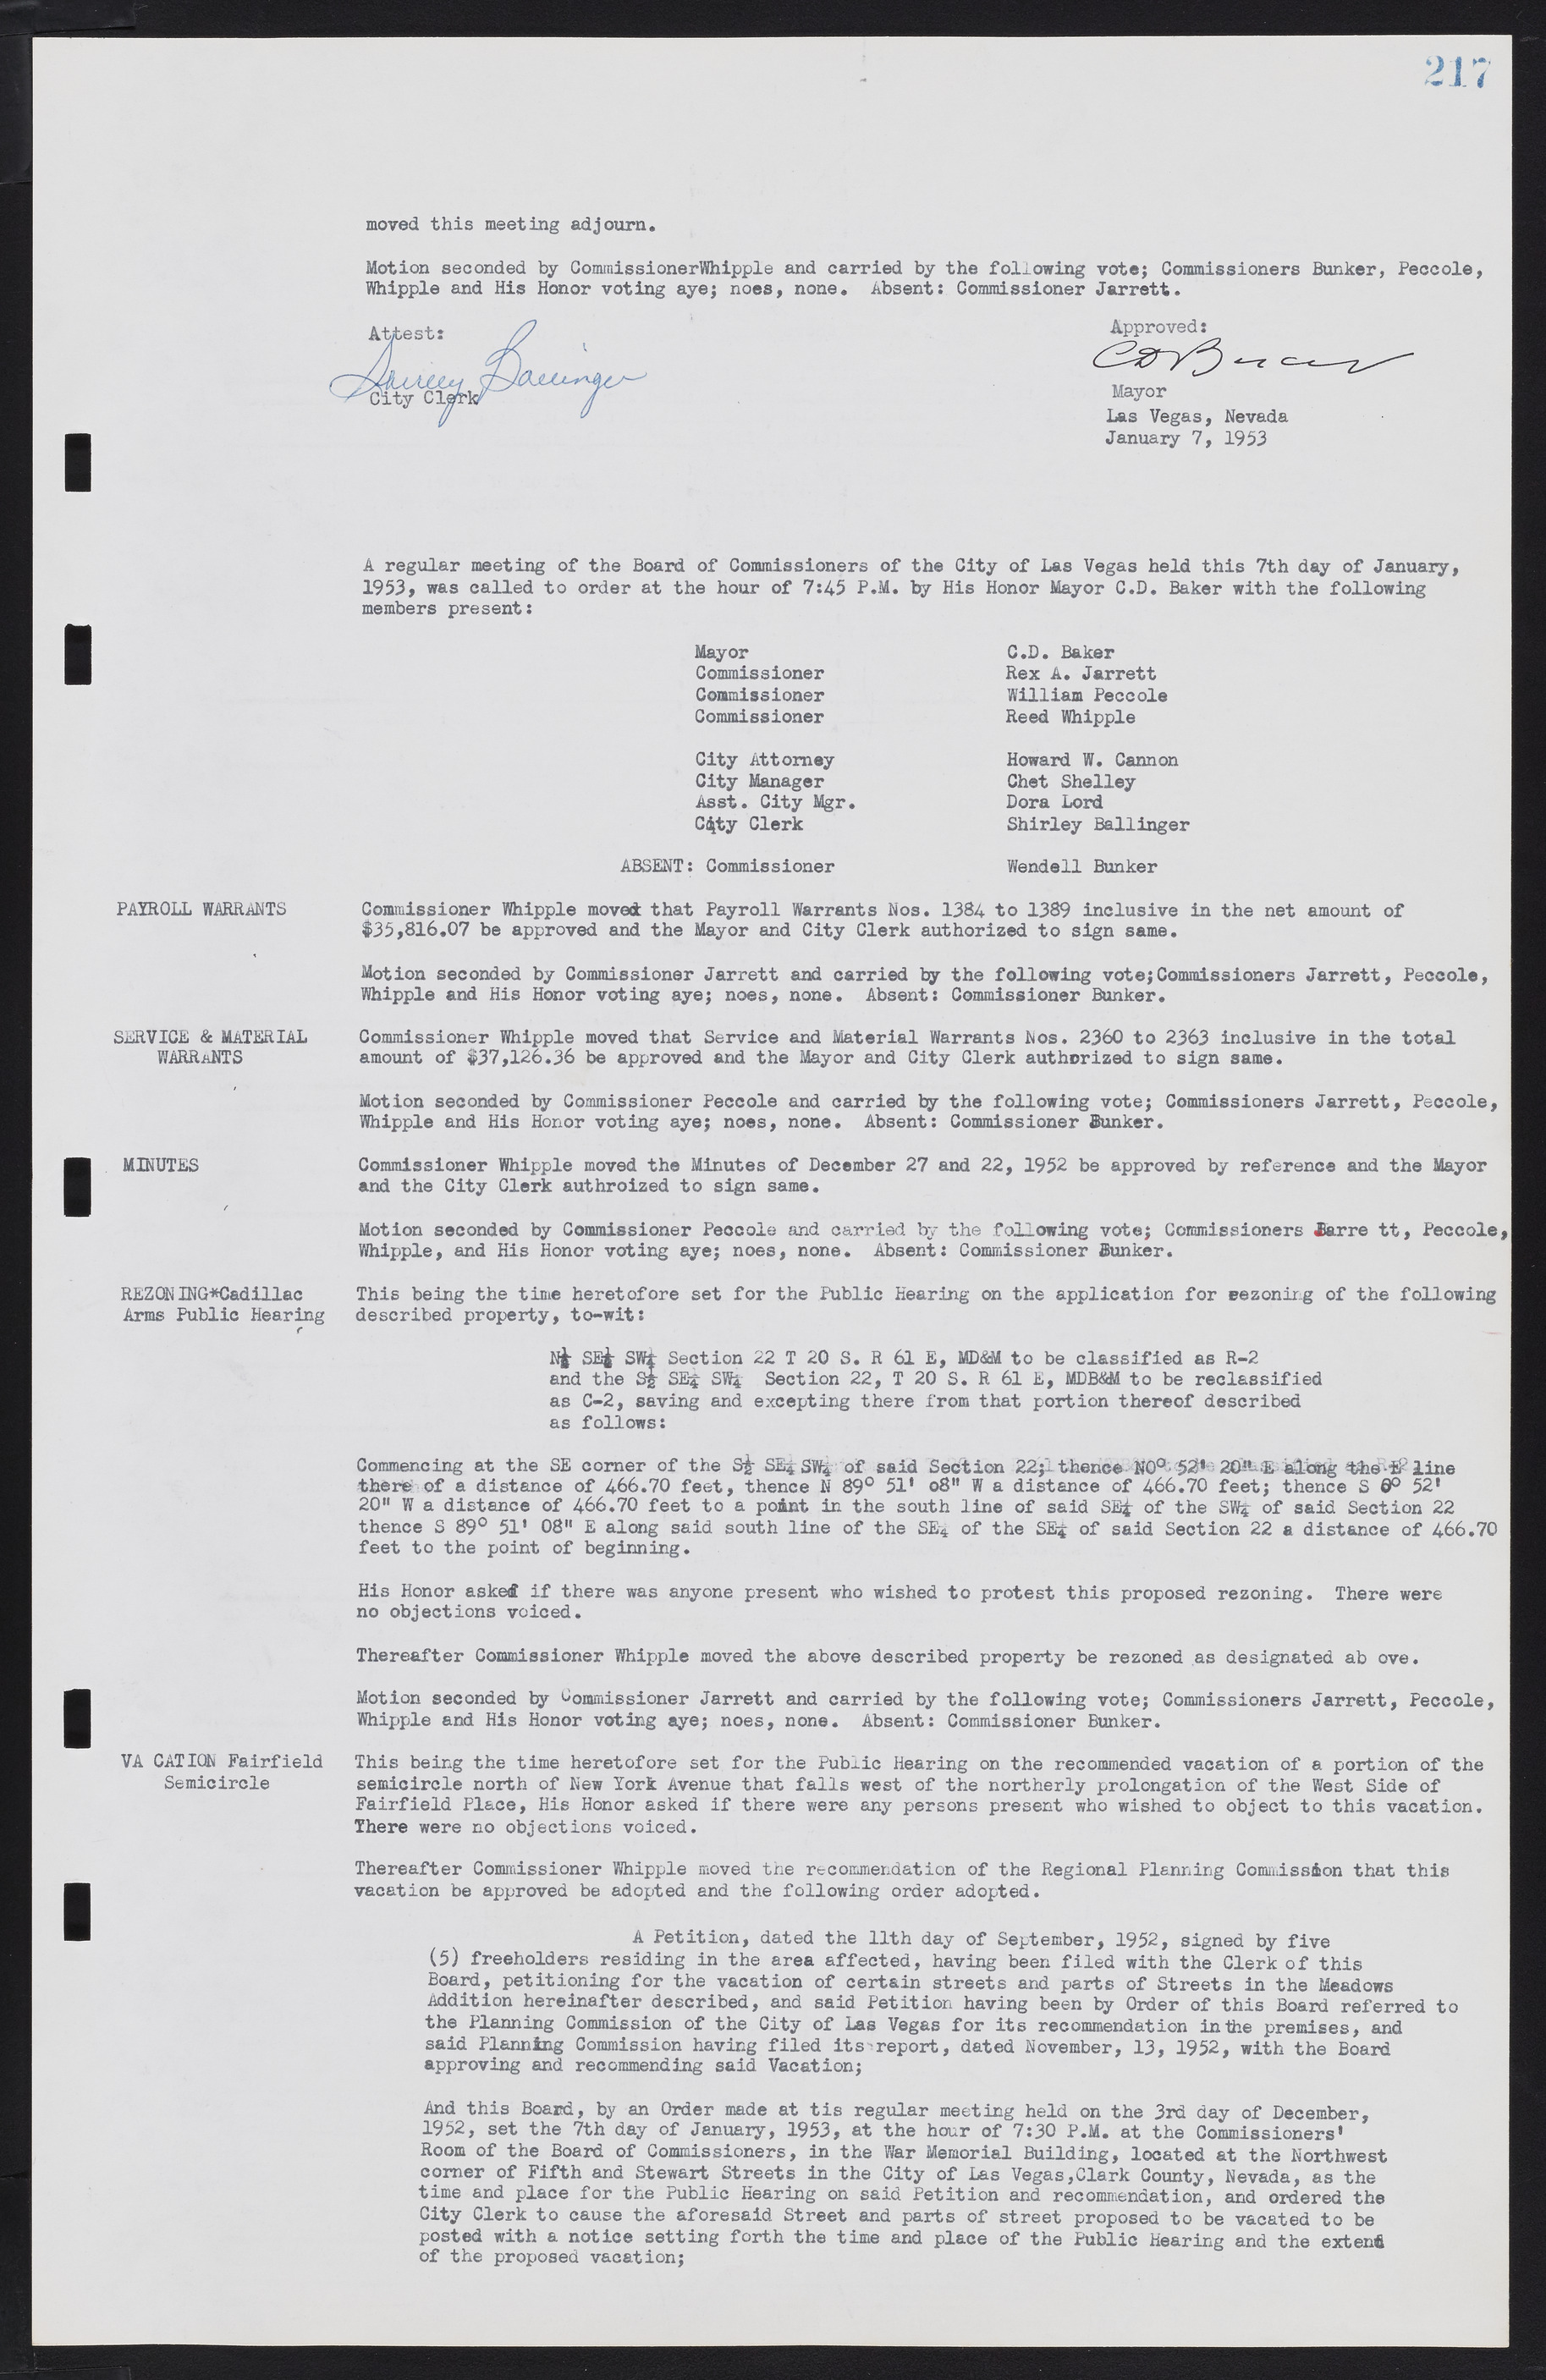 Las Vegas City Commission Minutes, May 26, 1952 to February 17, 1954, lvc000008-233